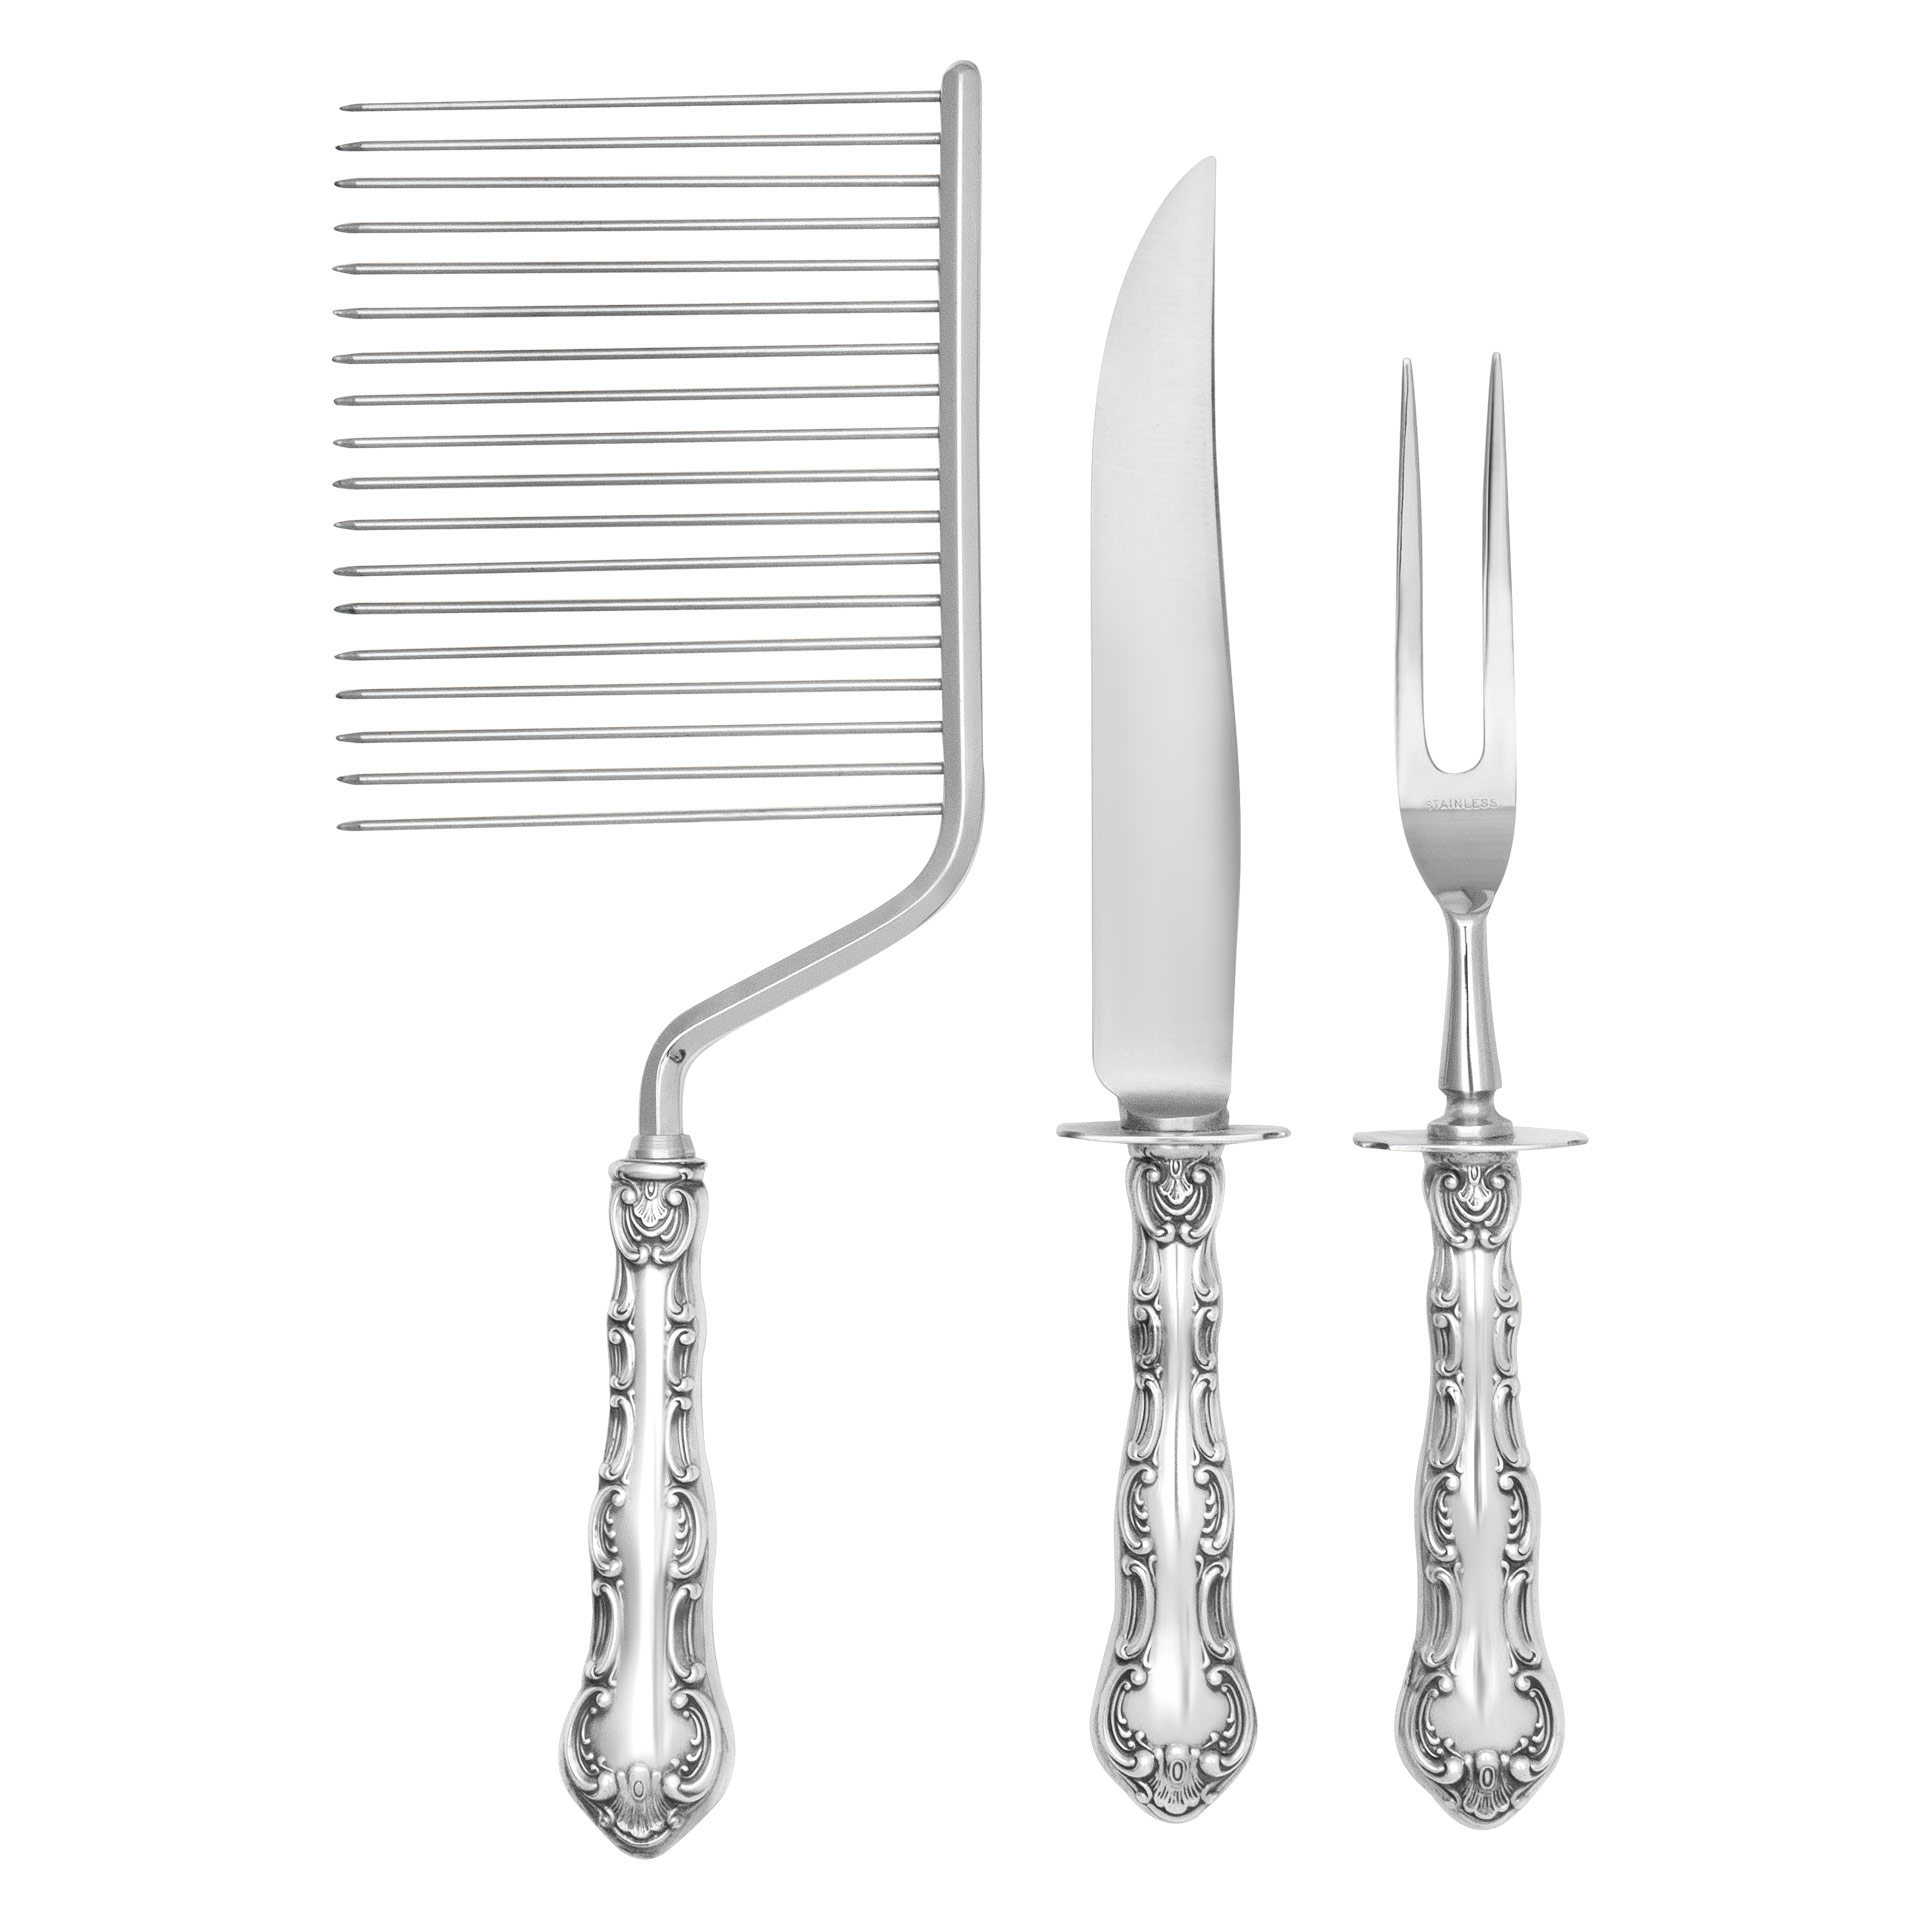 SUPER SIZED "Strasbourg" Sterling Silver Flatware set patented by Gorham in  1897-  8 Place setting for 12 (plus) with 18 serving pieces- Over 3300 grams sterling silver. image 3